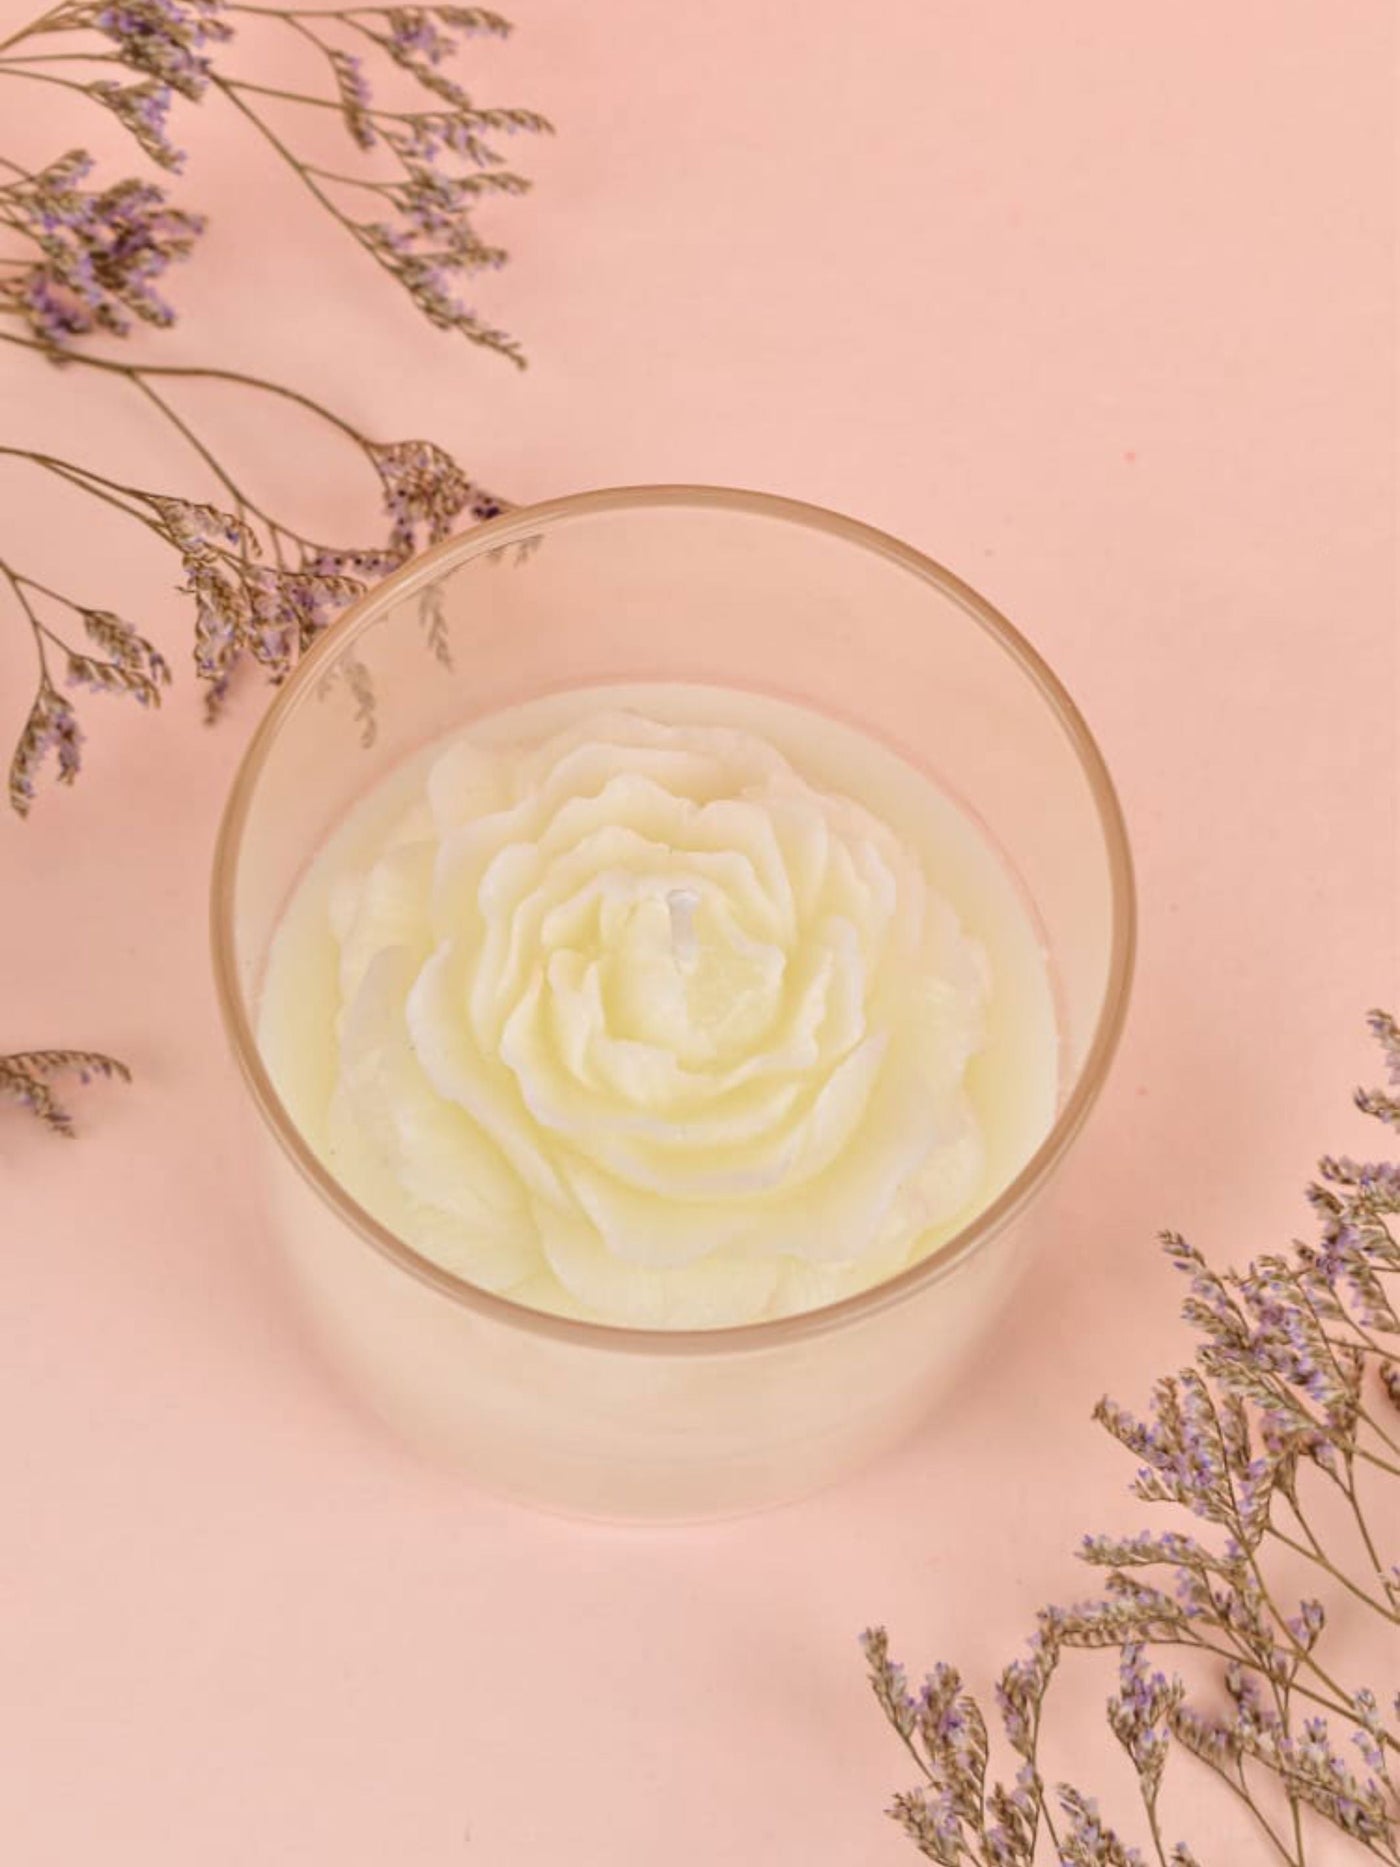 Soy Scented White Candle With White Rose On Top